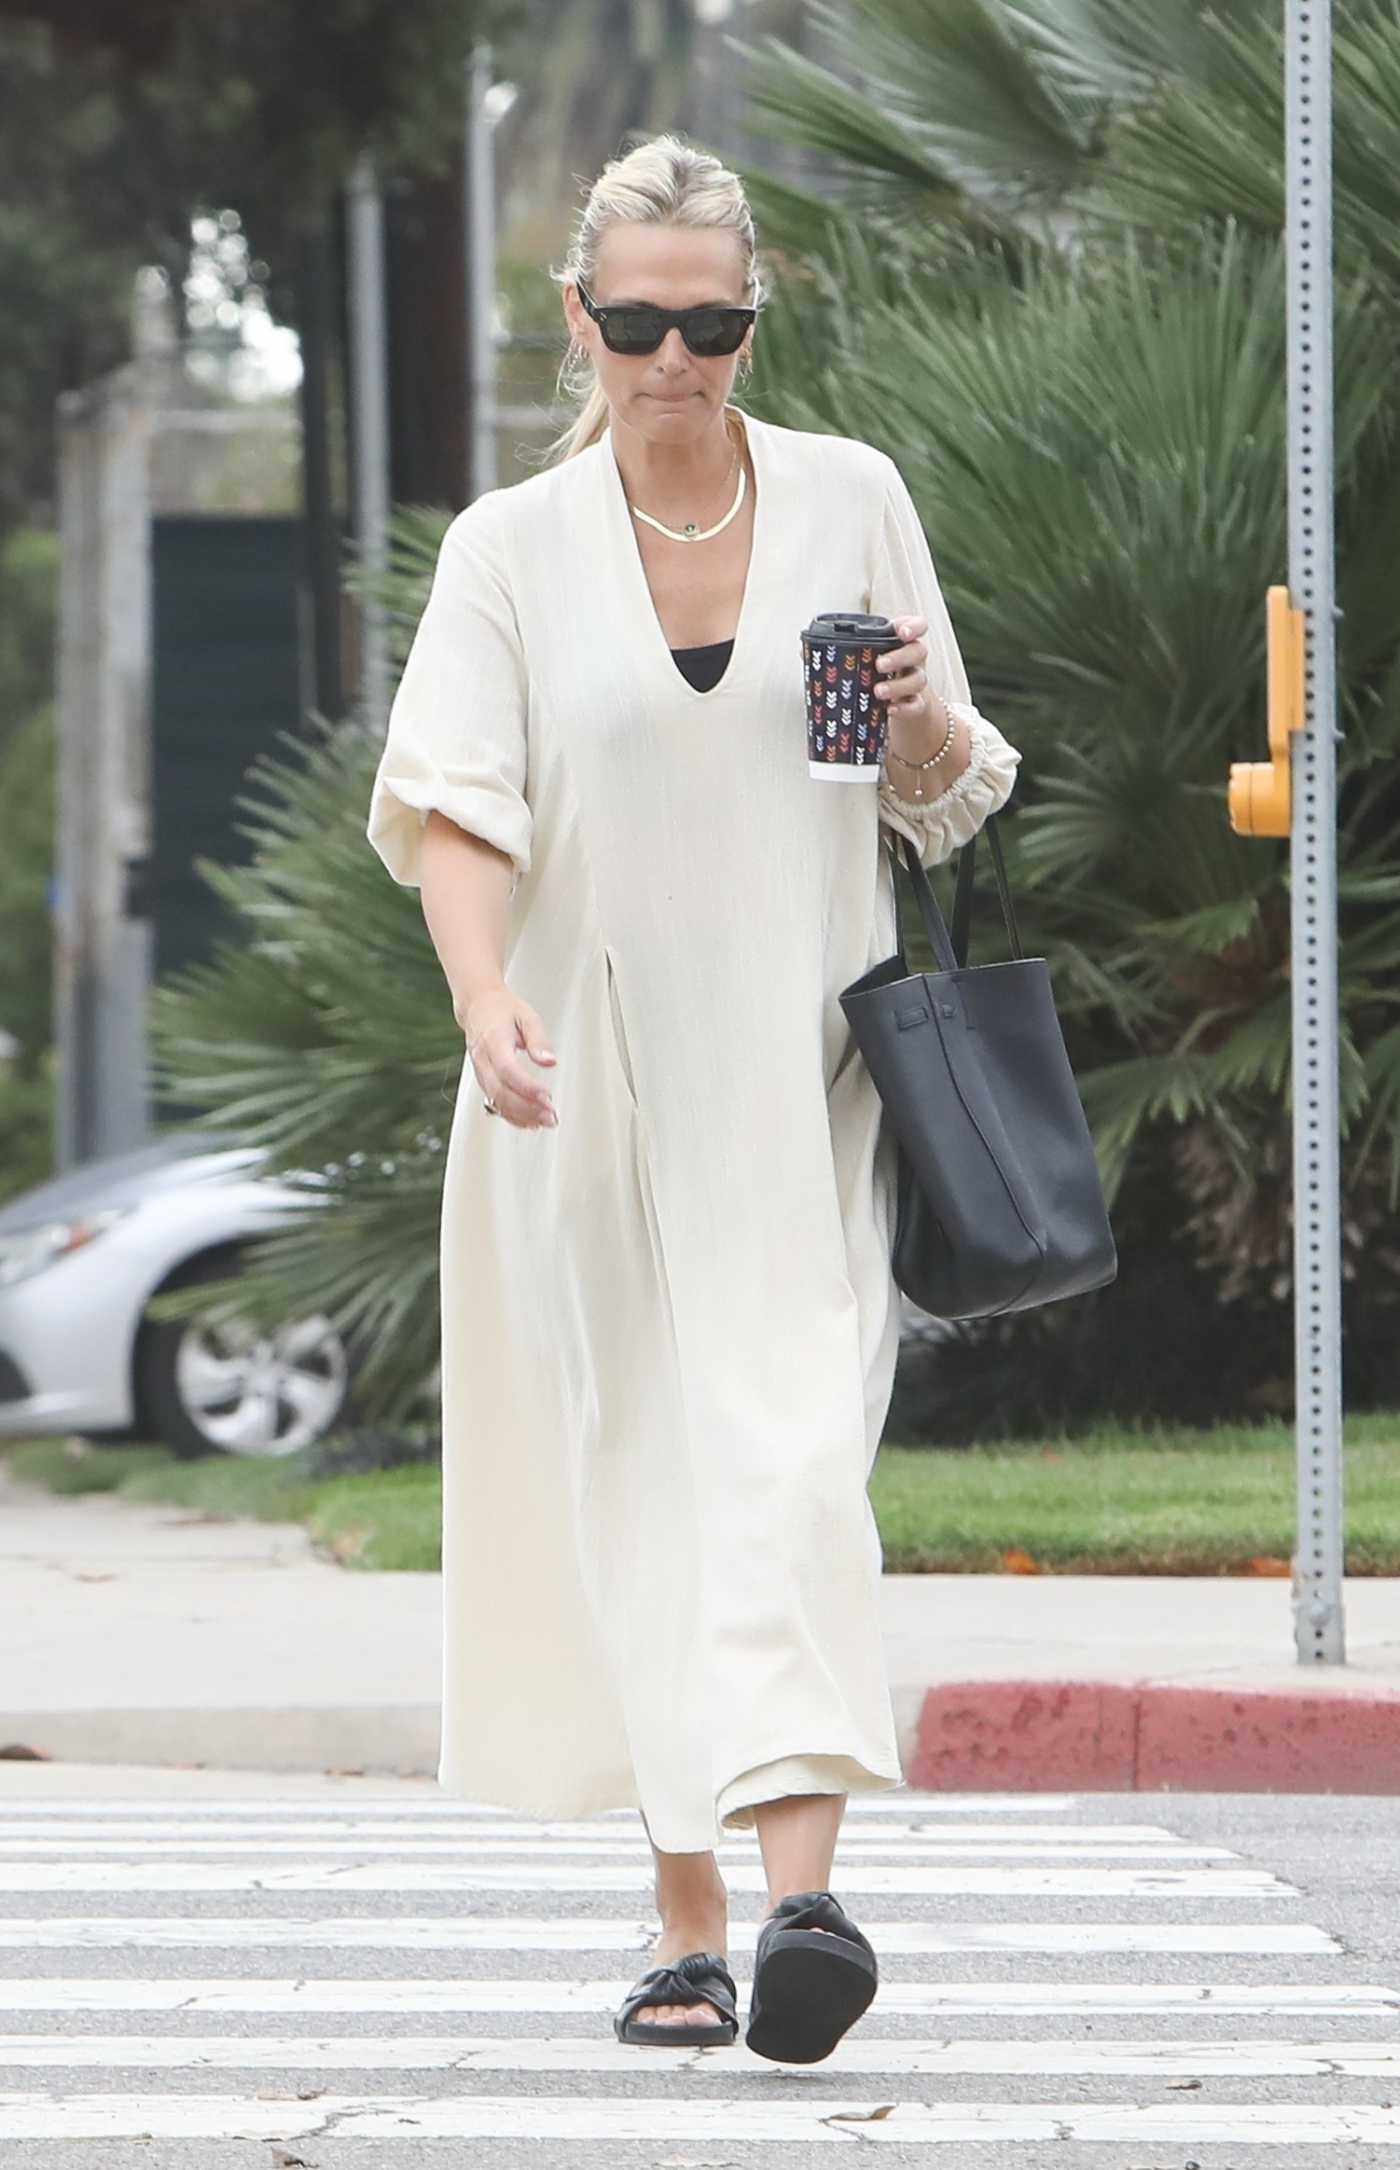 Molly Sims in a White Dress Was Seen Out in Santa Monica 09/15/2022